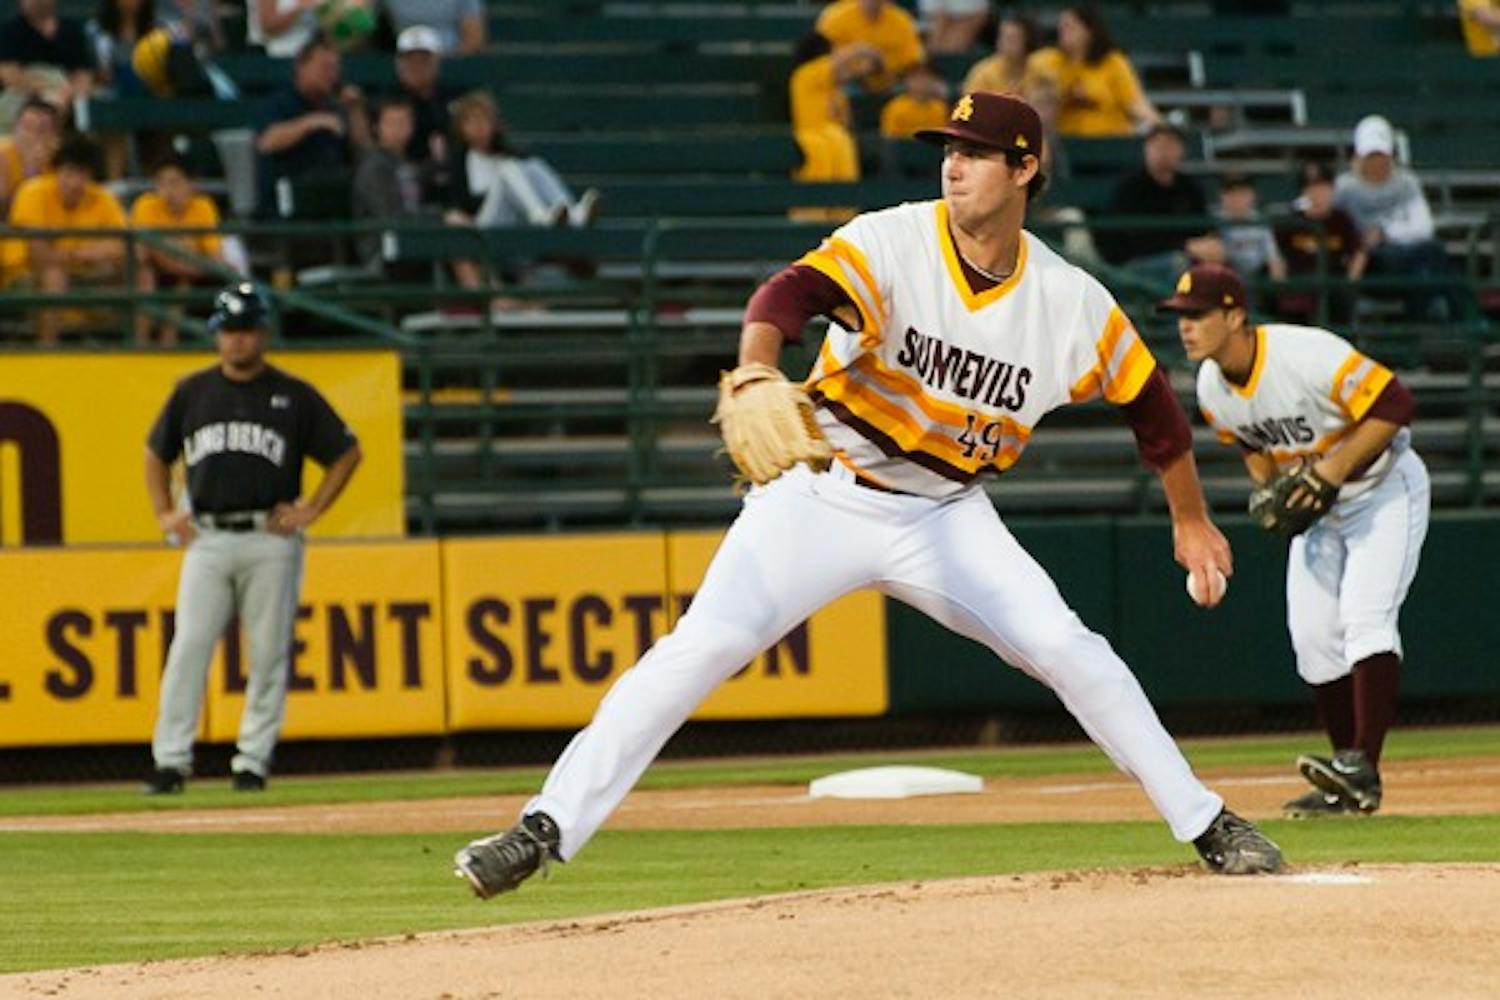 Junior pitcher Ryan Kellogg delivers from the mound in a game against Long Beach State on Saturday, March 7, 2015 at Phoenix Municipal Stadium. Kellogg pitched seven scoreless innings in a 4-2 Sun Devil loss to the Dirtbags. (Ben Moffat/The State Press)